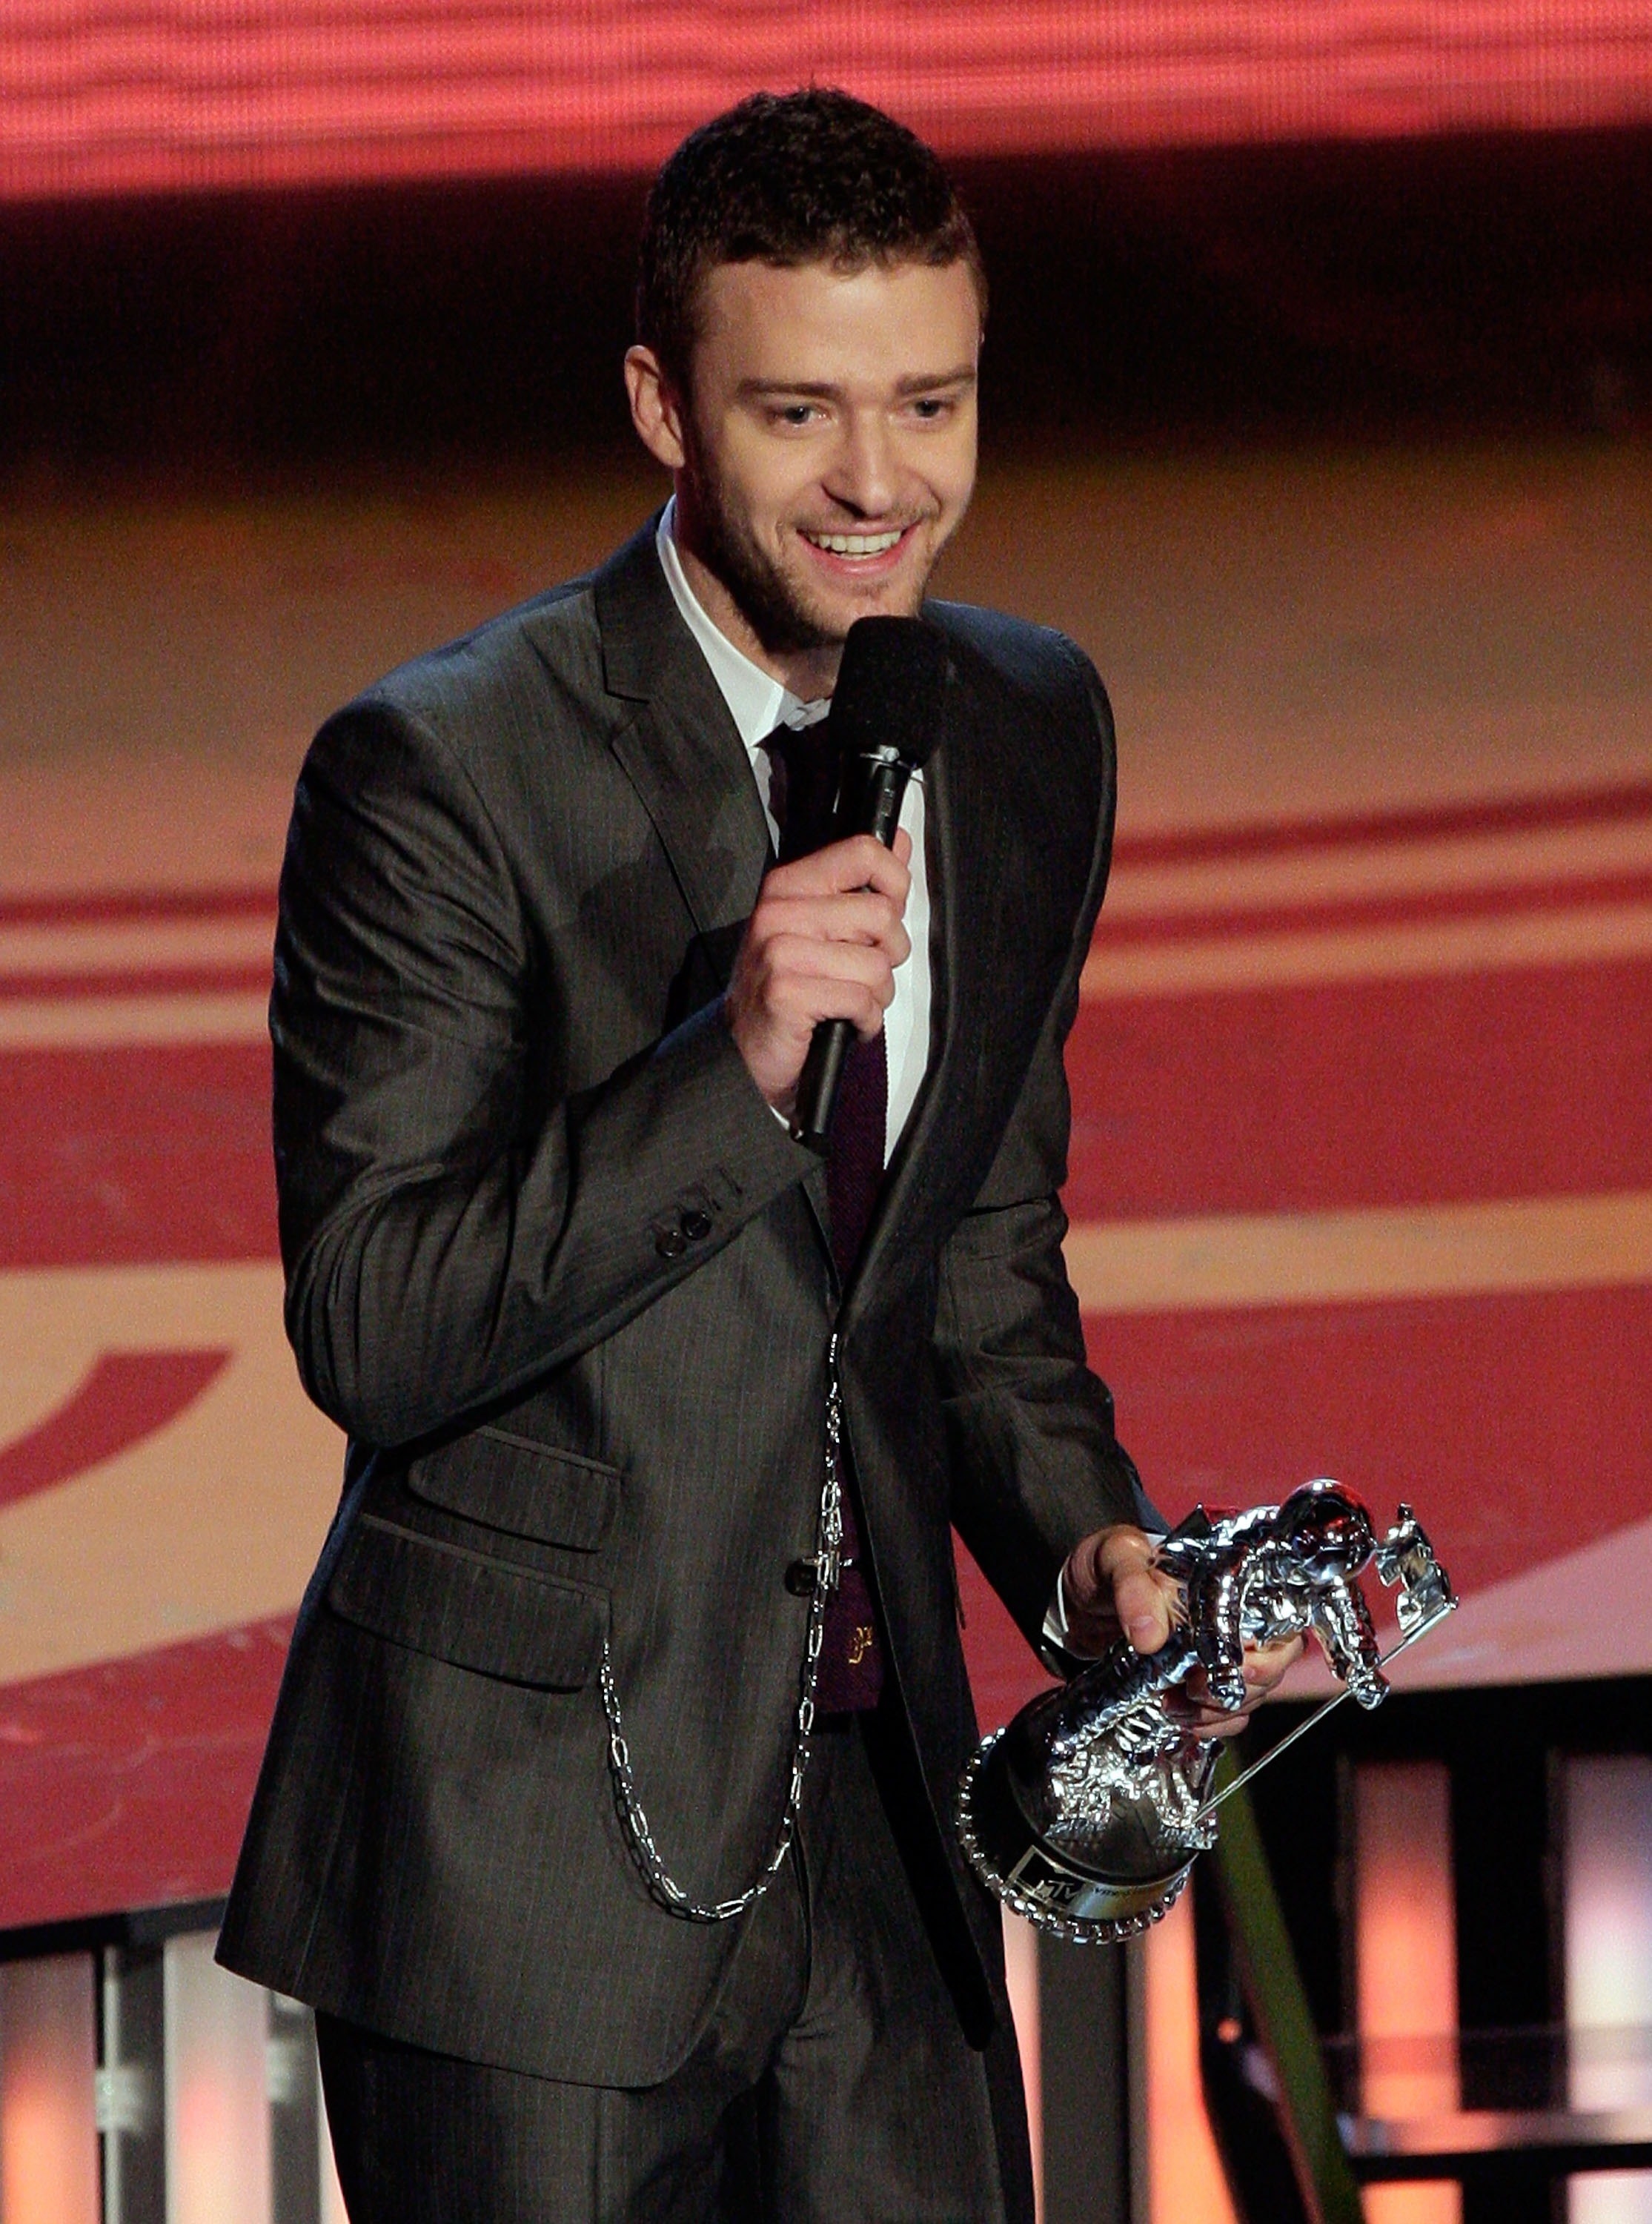 just on stage with his award